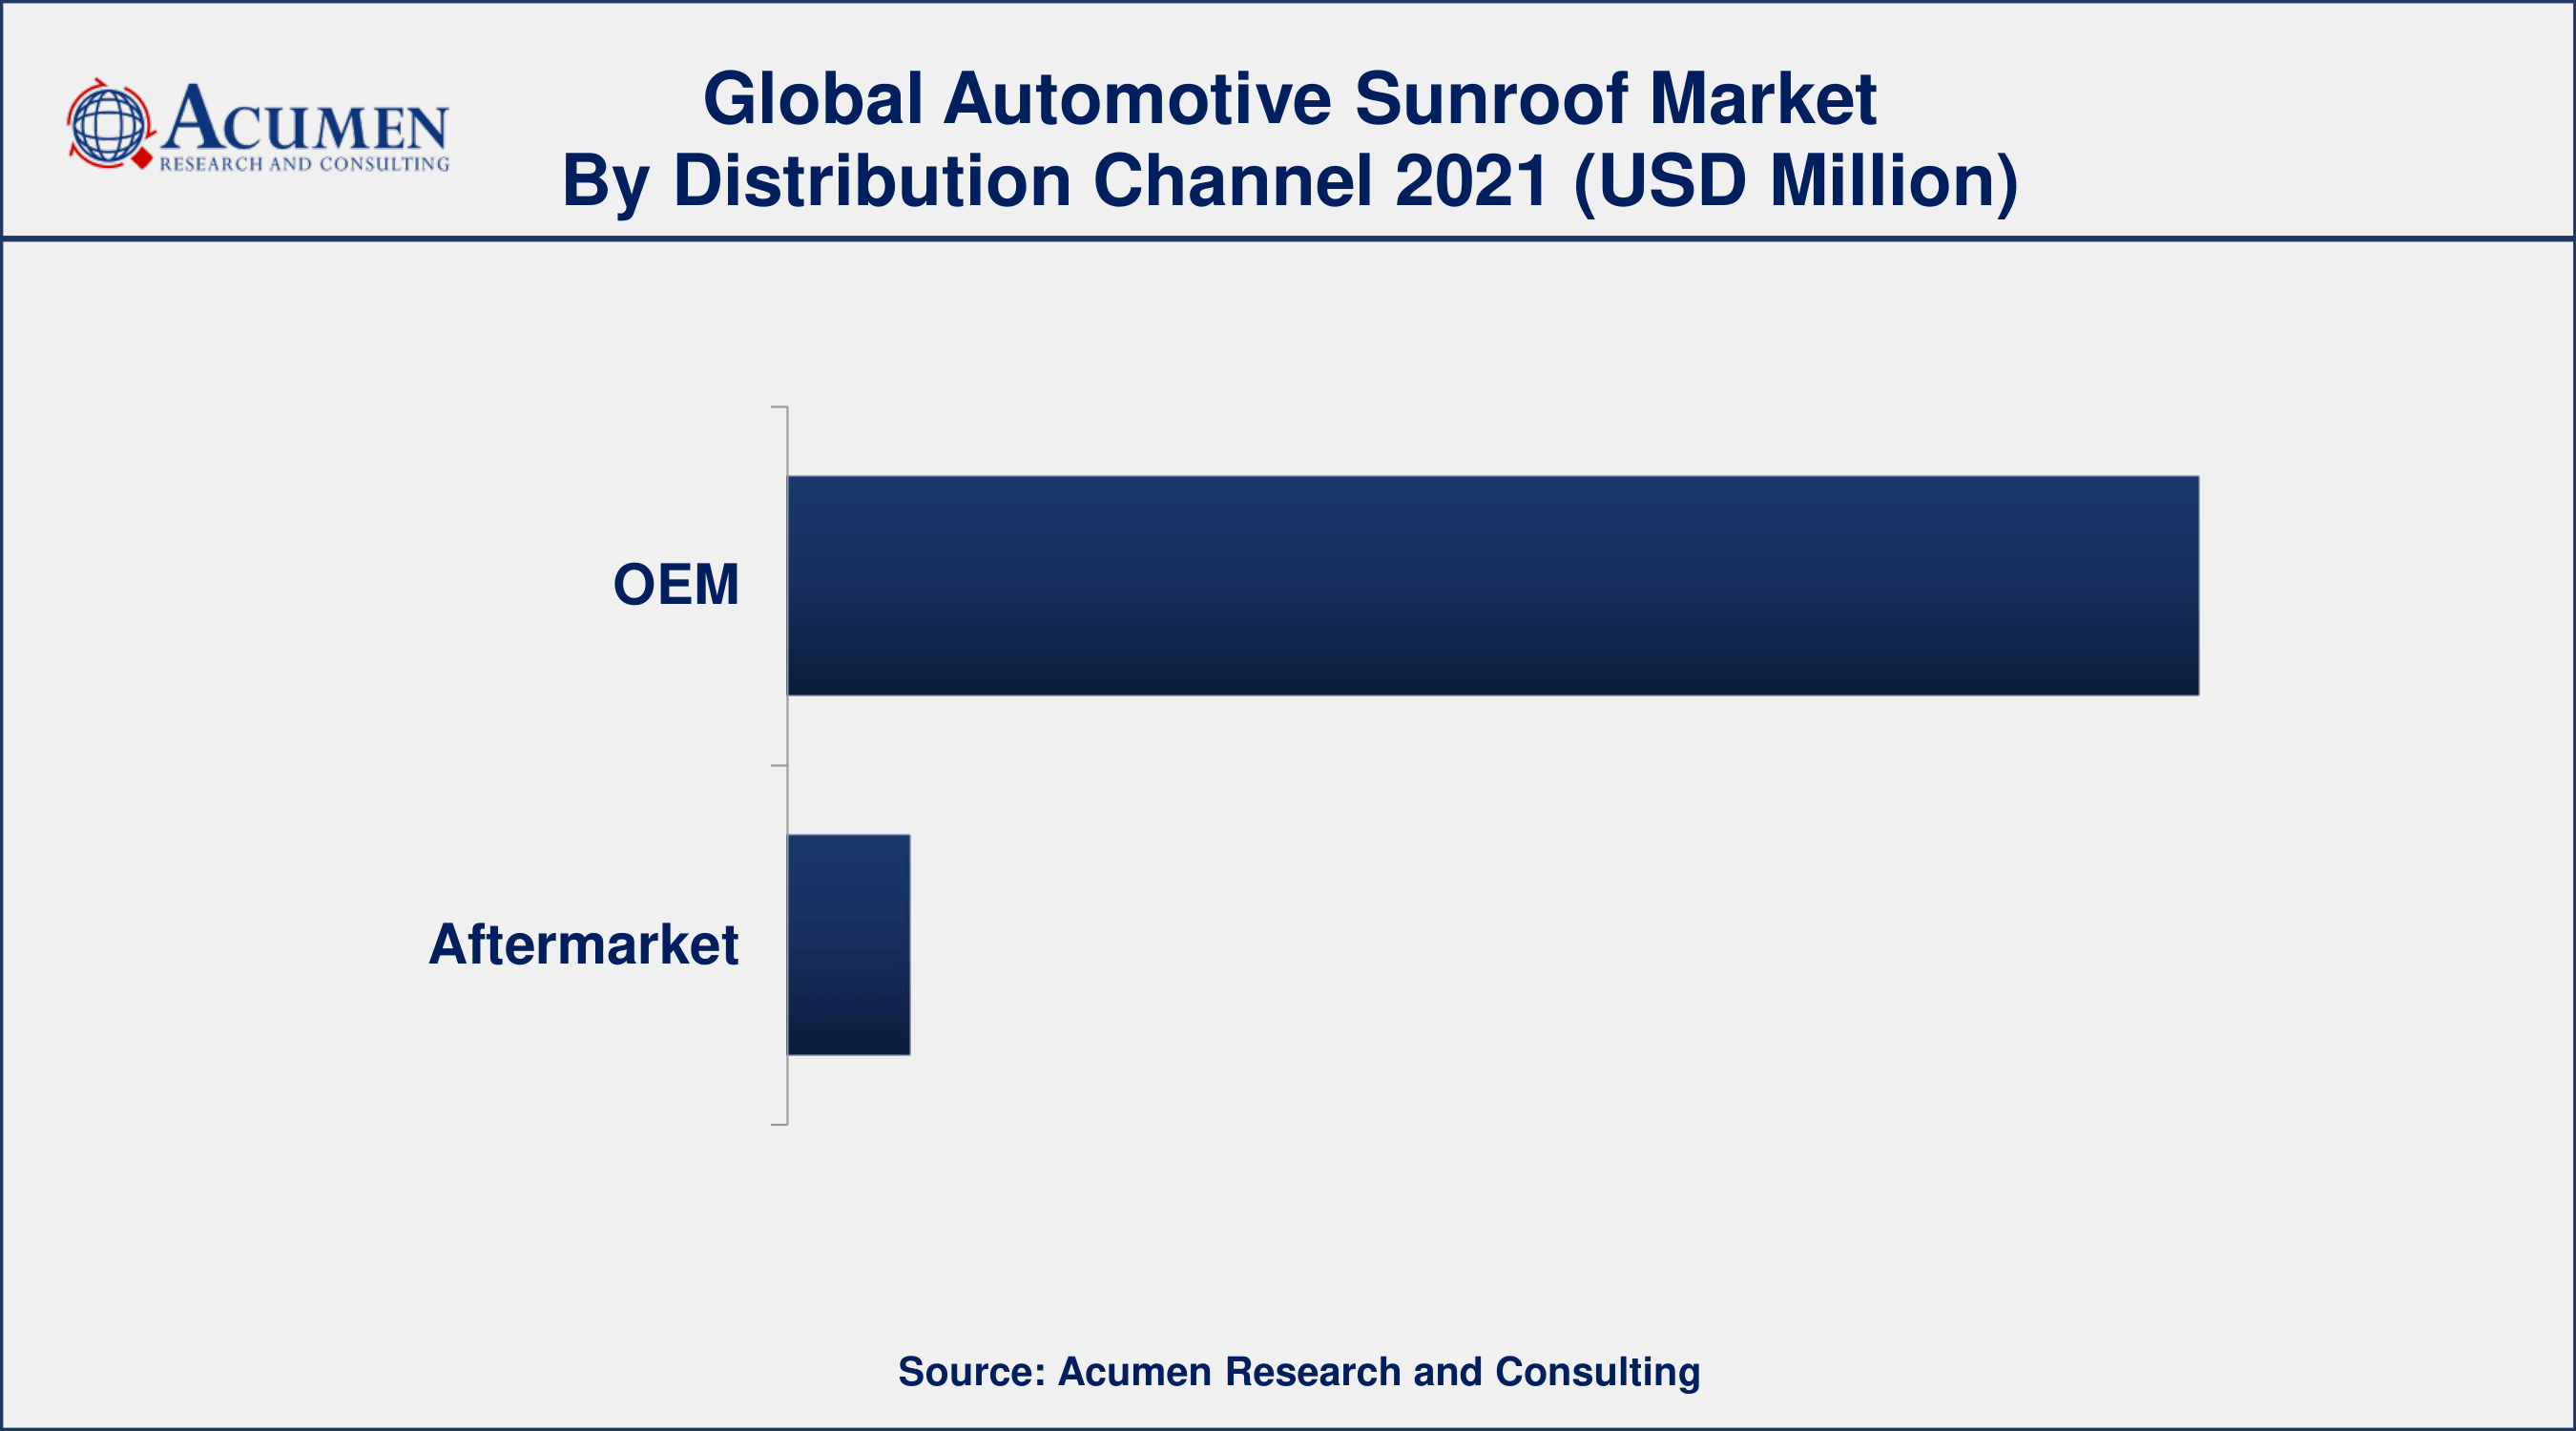 Among distribution channel, OEMs category engaged more than 92% of the total market share